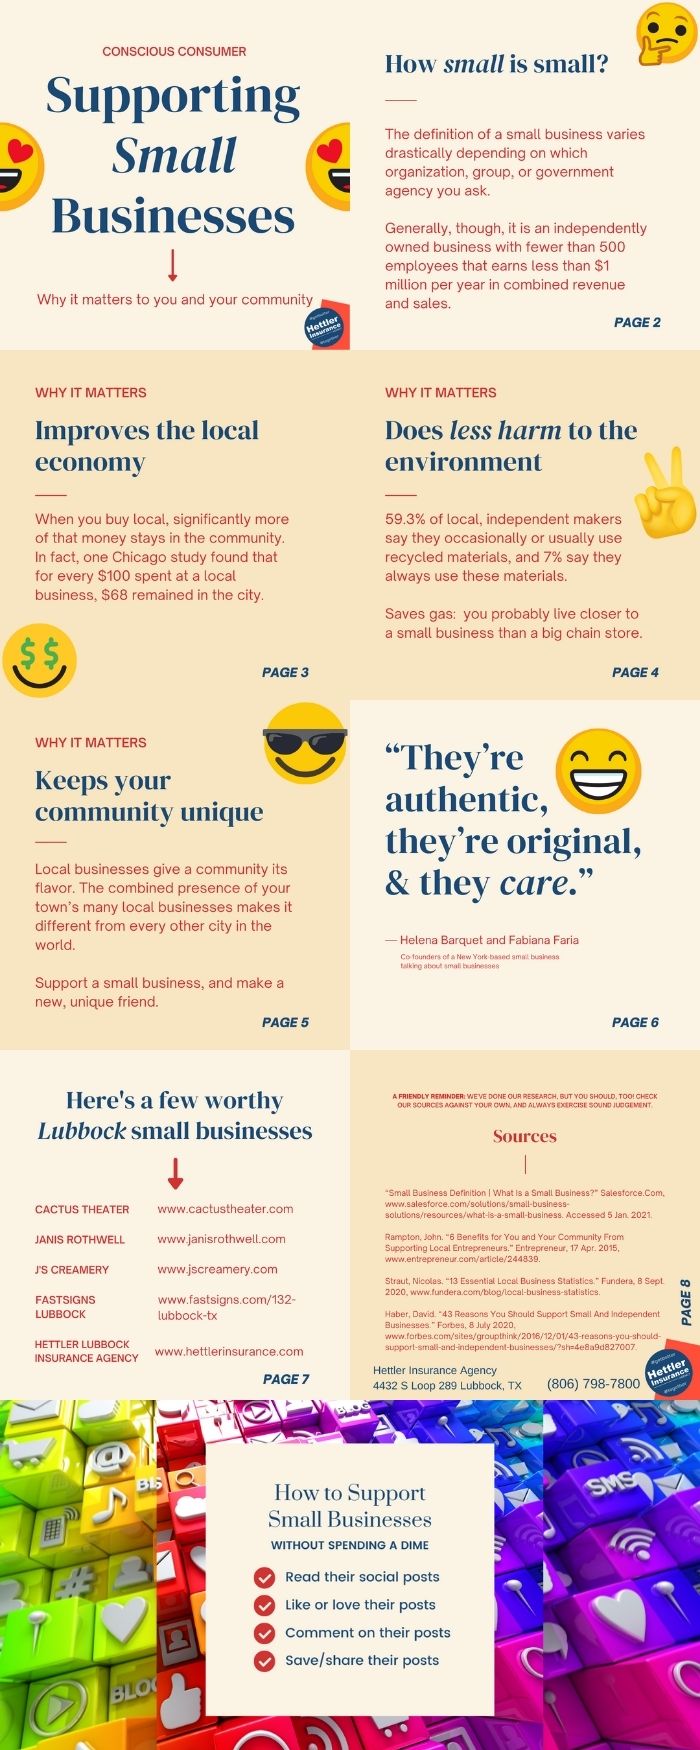 Infographic, Small Business Support Social Good Matters To Your Community | Hettler Lubbock Insurance Texas